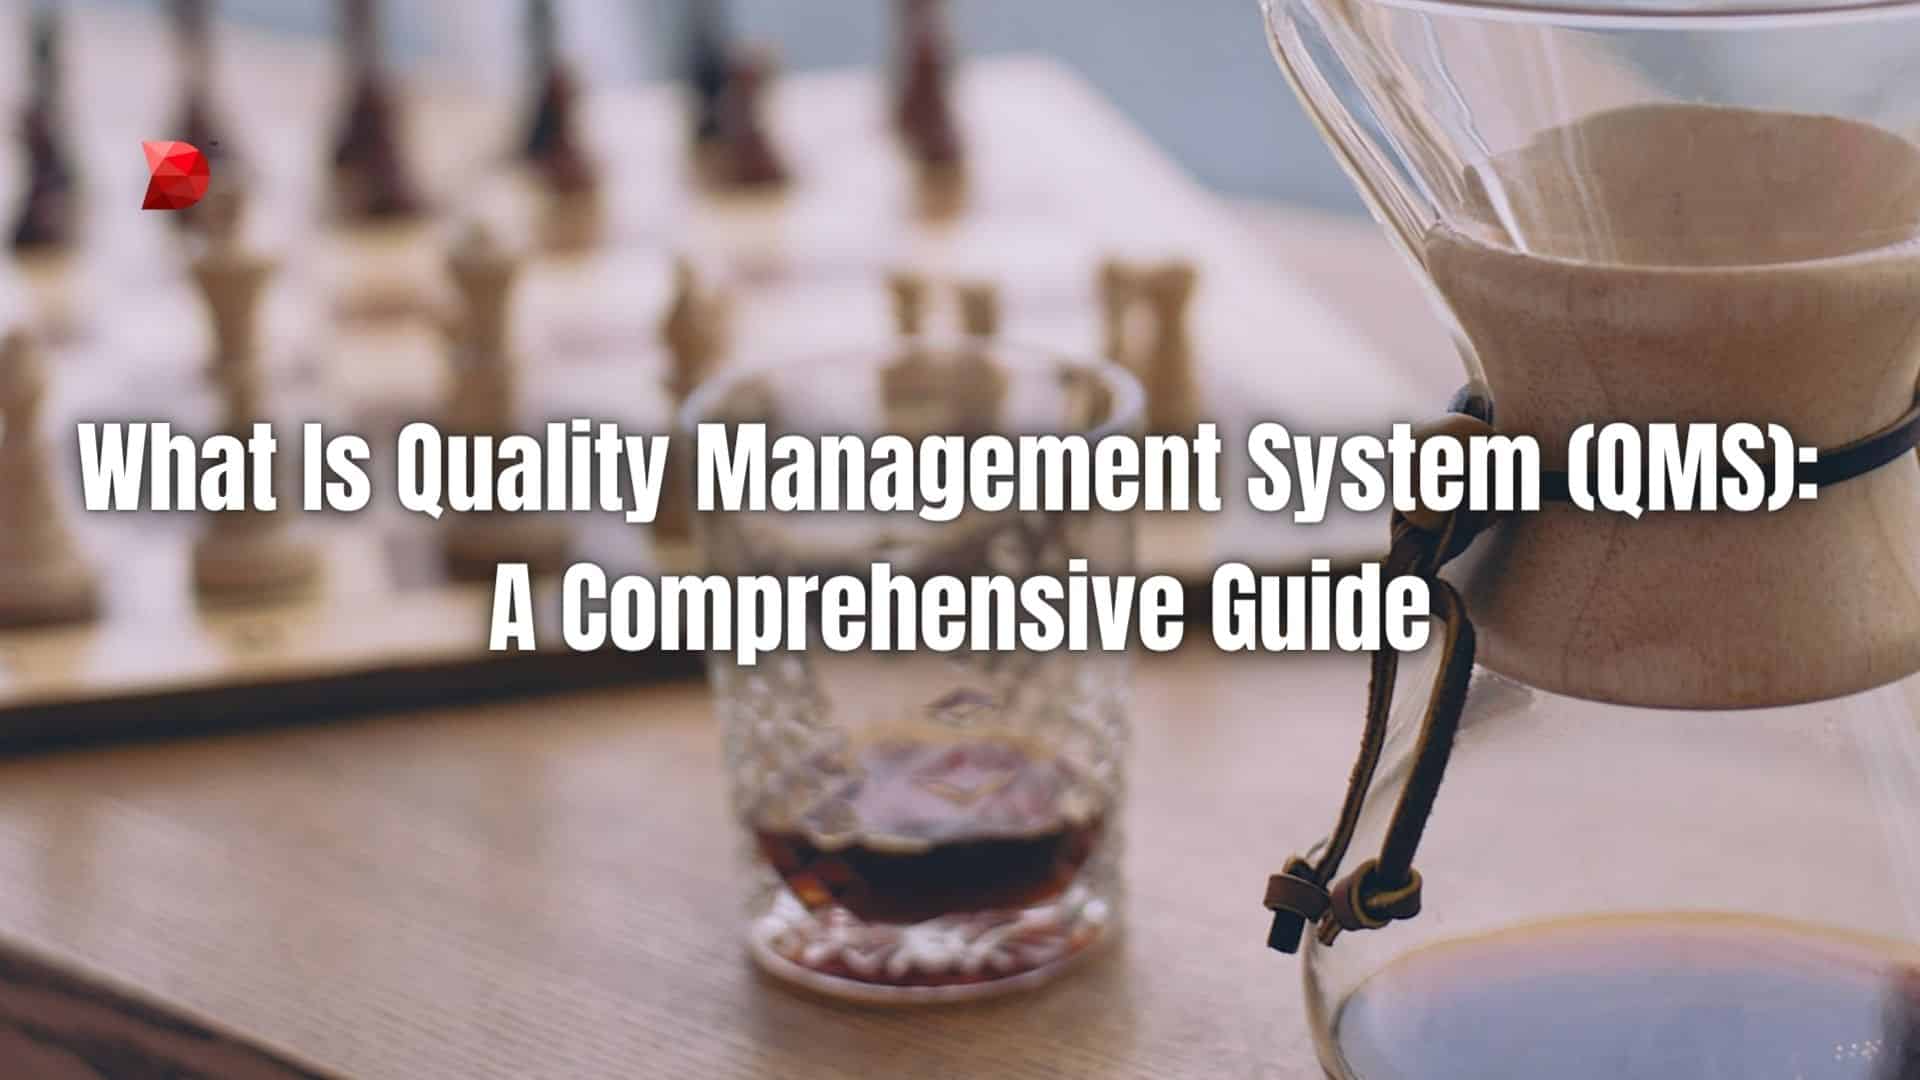 What Is Quality Management System (QMS) A Comprehensive Guide